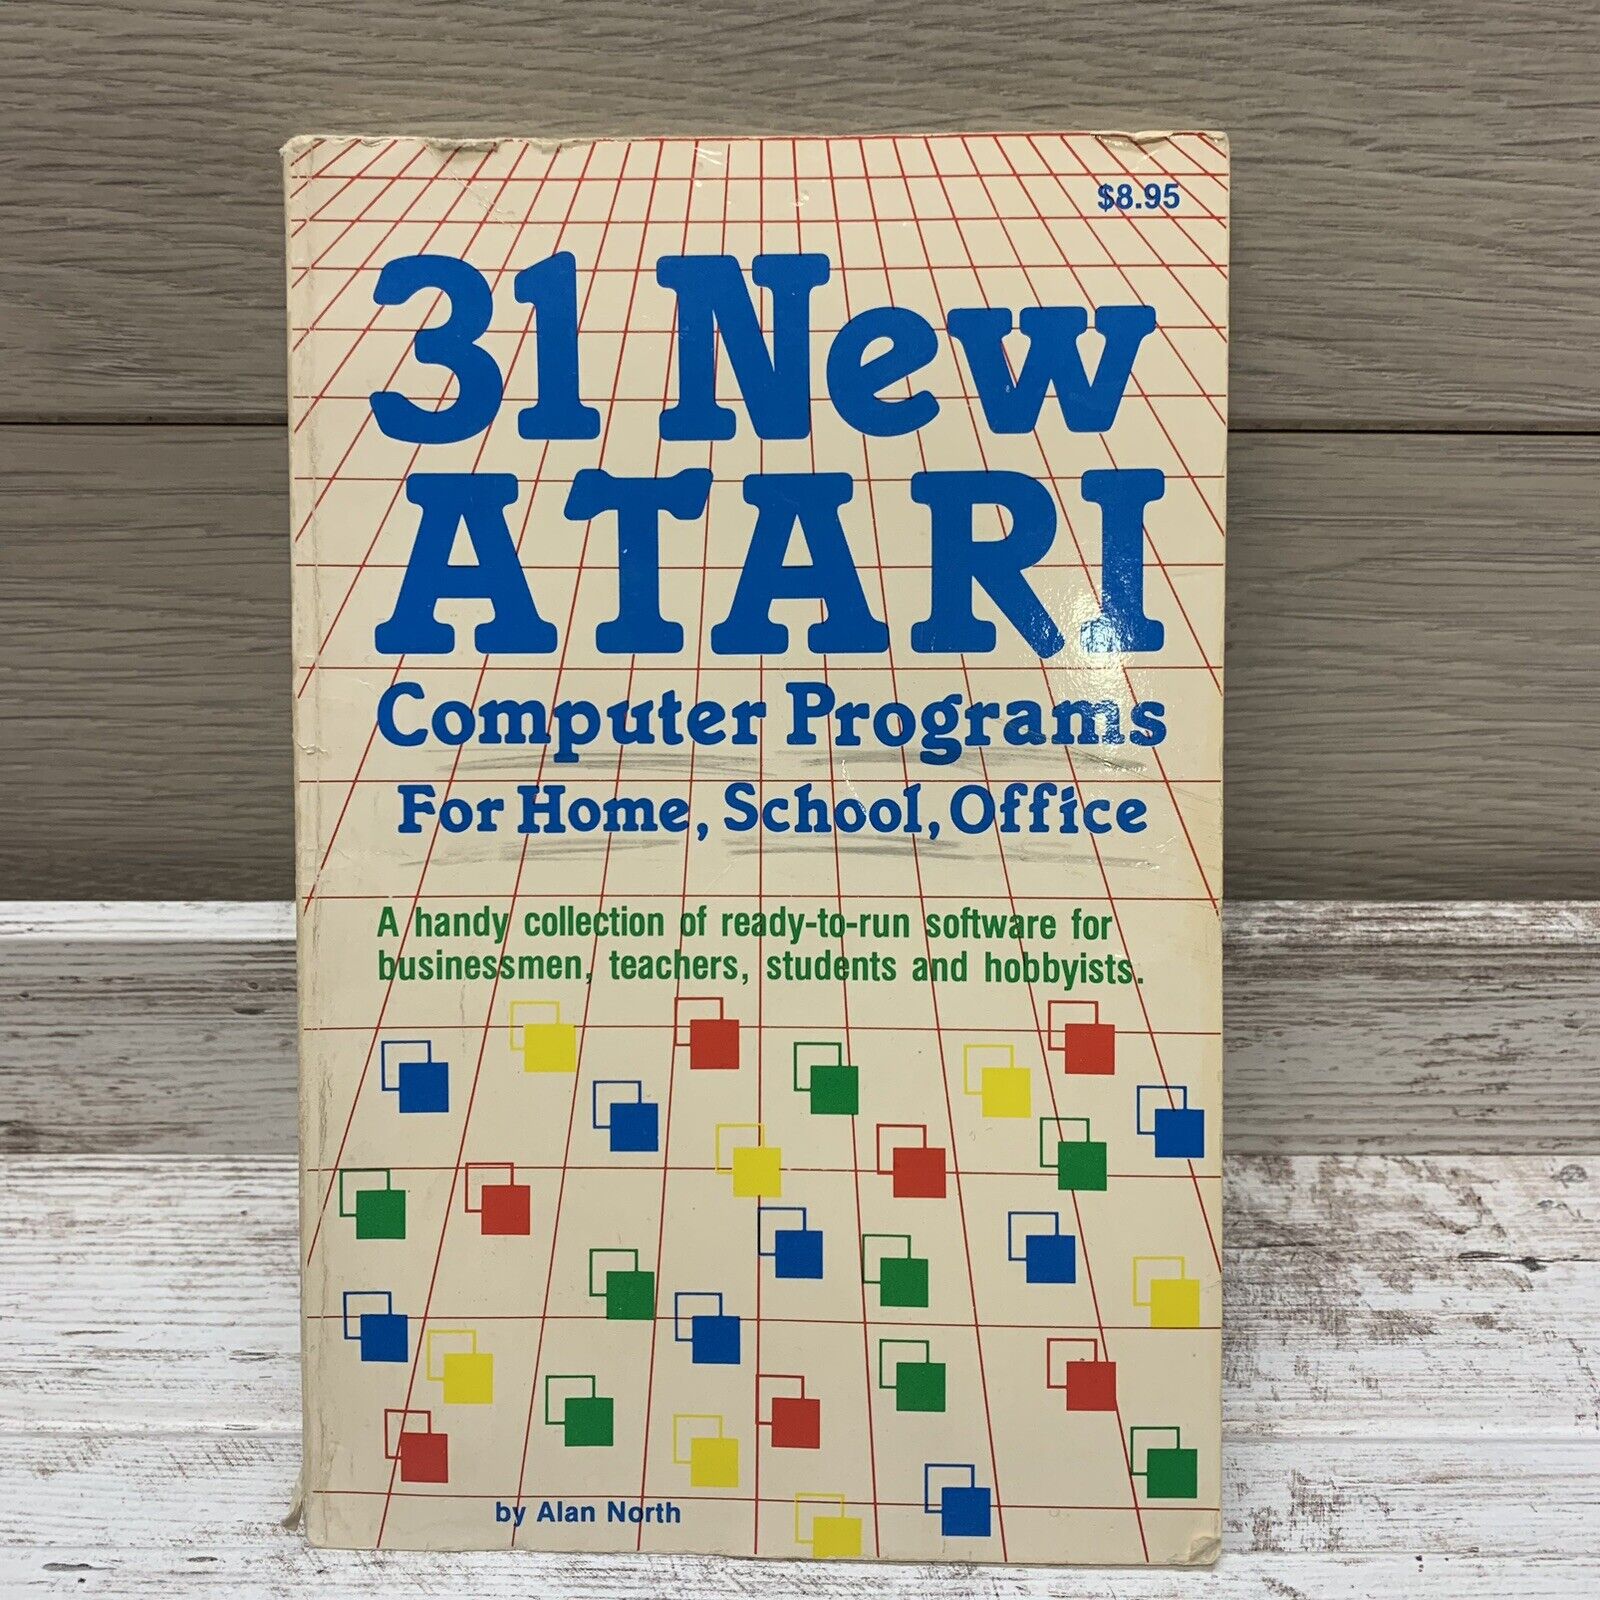 31 New Atari Computer Programs For Home And School And Office Book Vintage